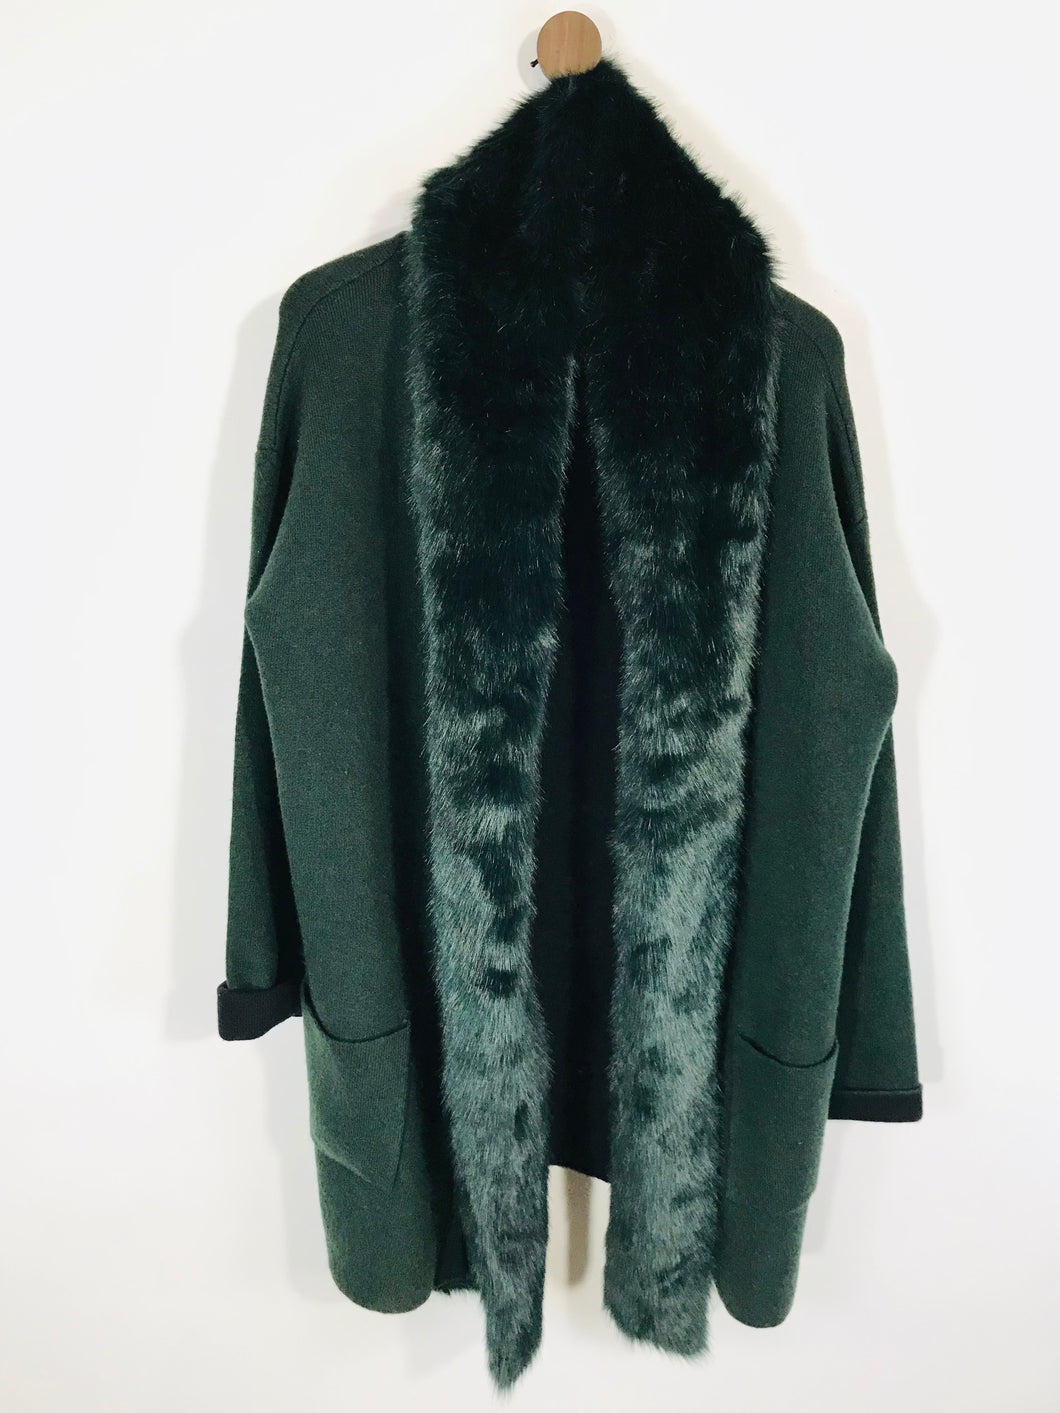 French Connection Women's Faux Fur Hooded Overcoat Coat | M UK10-12 | Green